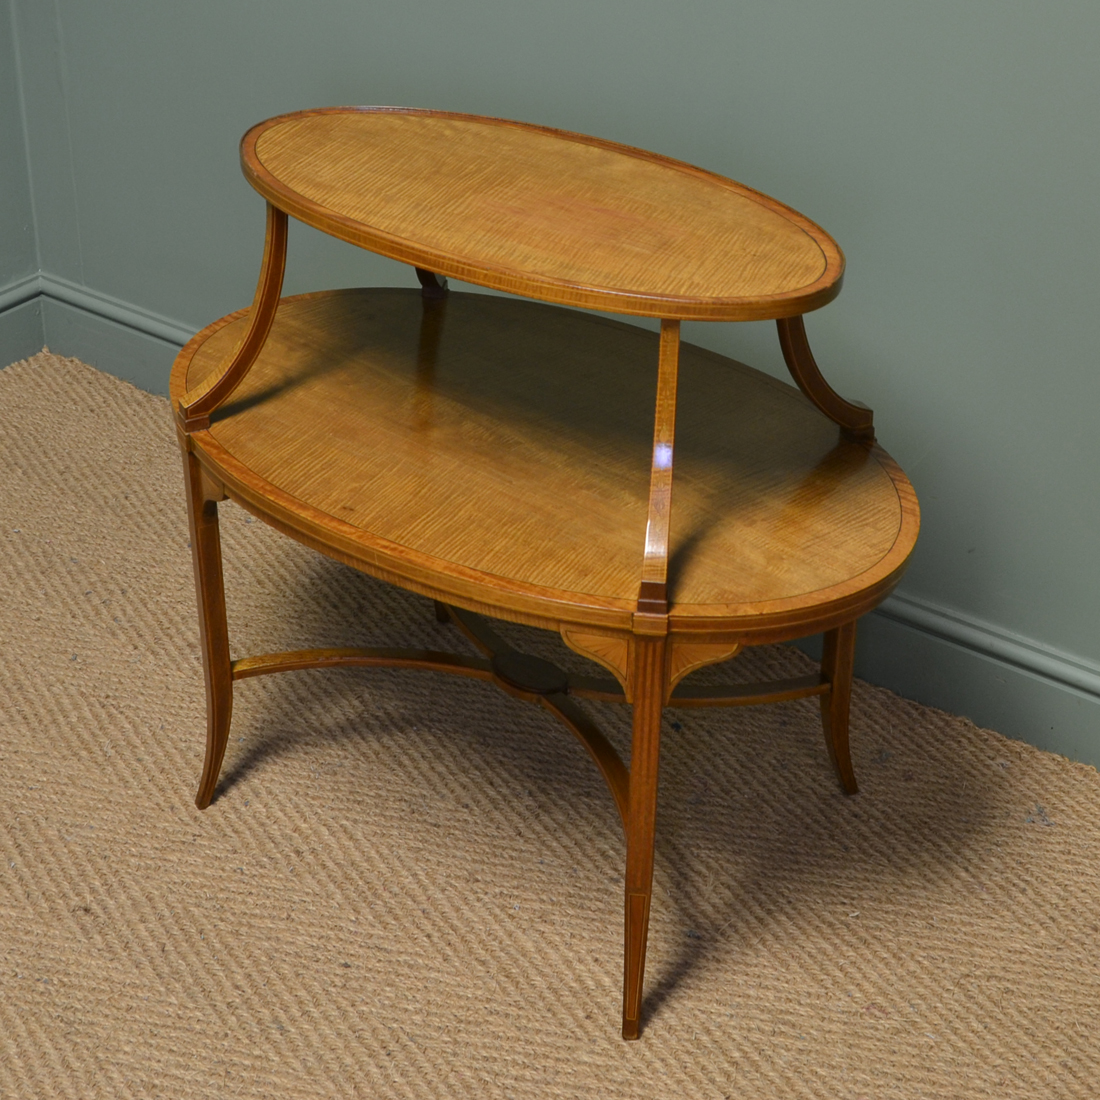 Superb Quality Edwards & Roberts Satinwood Two Tier Occasional / Lamp Table - Image 4 of 9